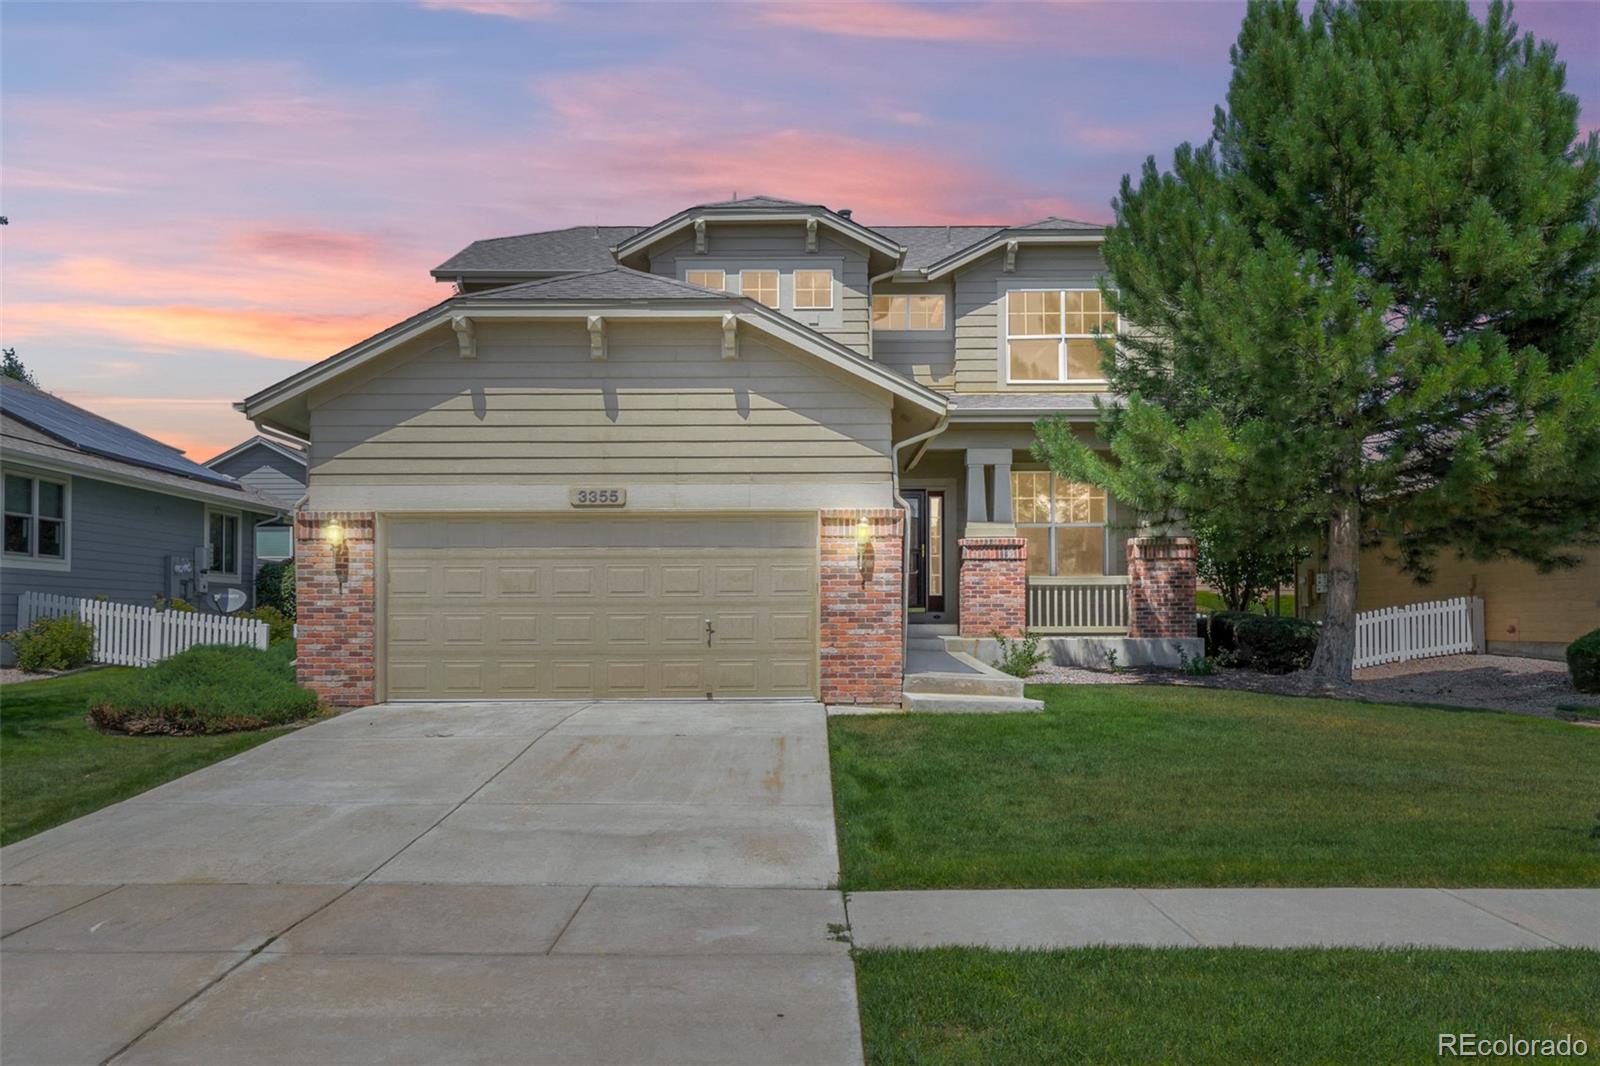 3355 W 126th Place, broomfield MLS: 8839602 Beds: 2 Baths: 3 Price: $599,000